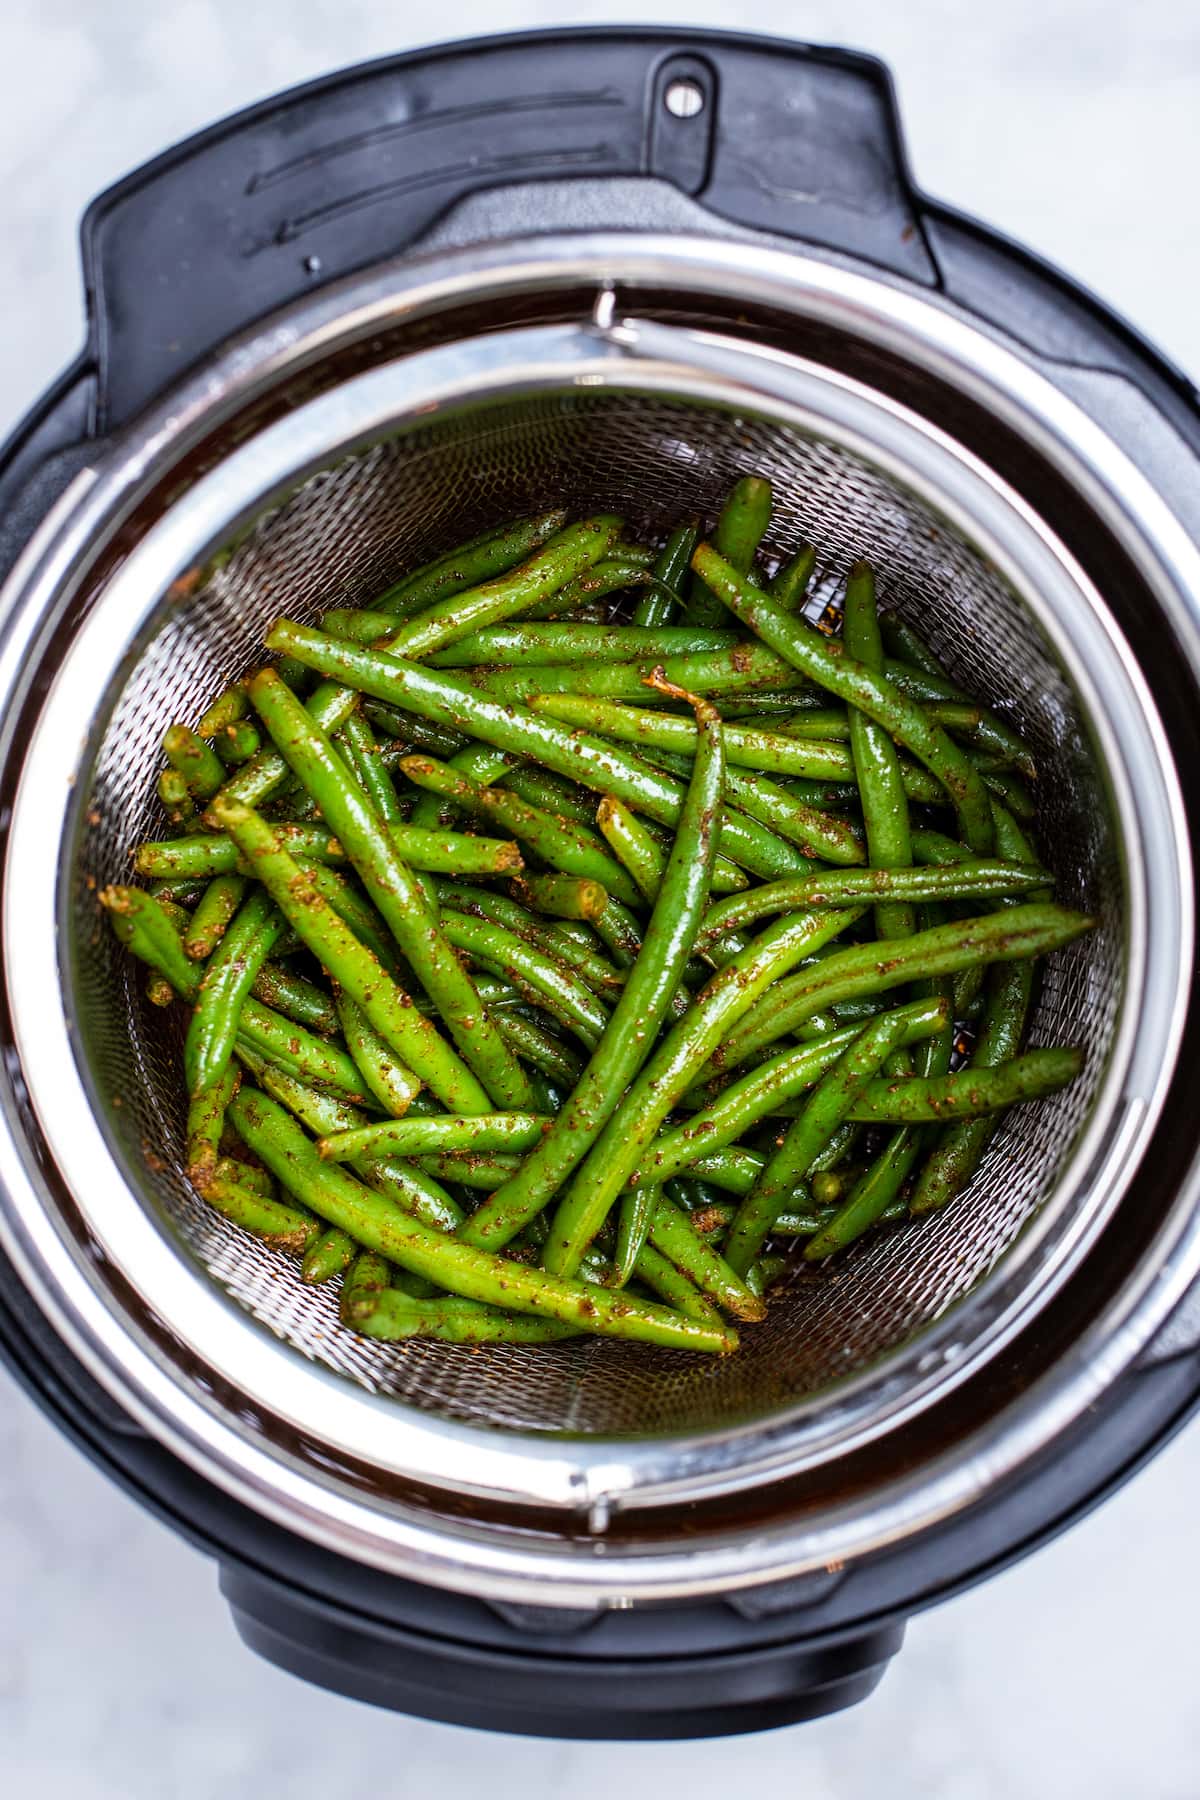 Cooked green beans sitting in an instant pot with a steamer basket.